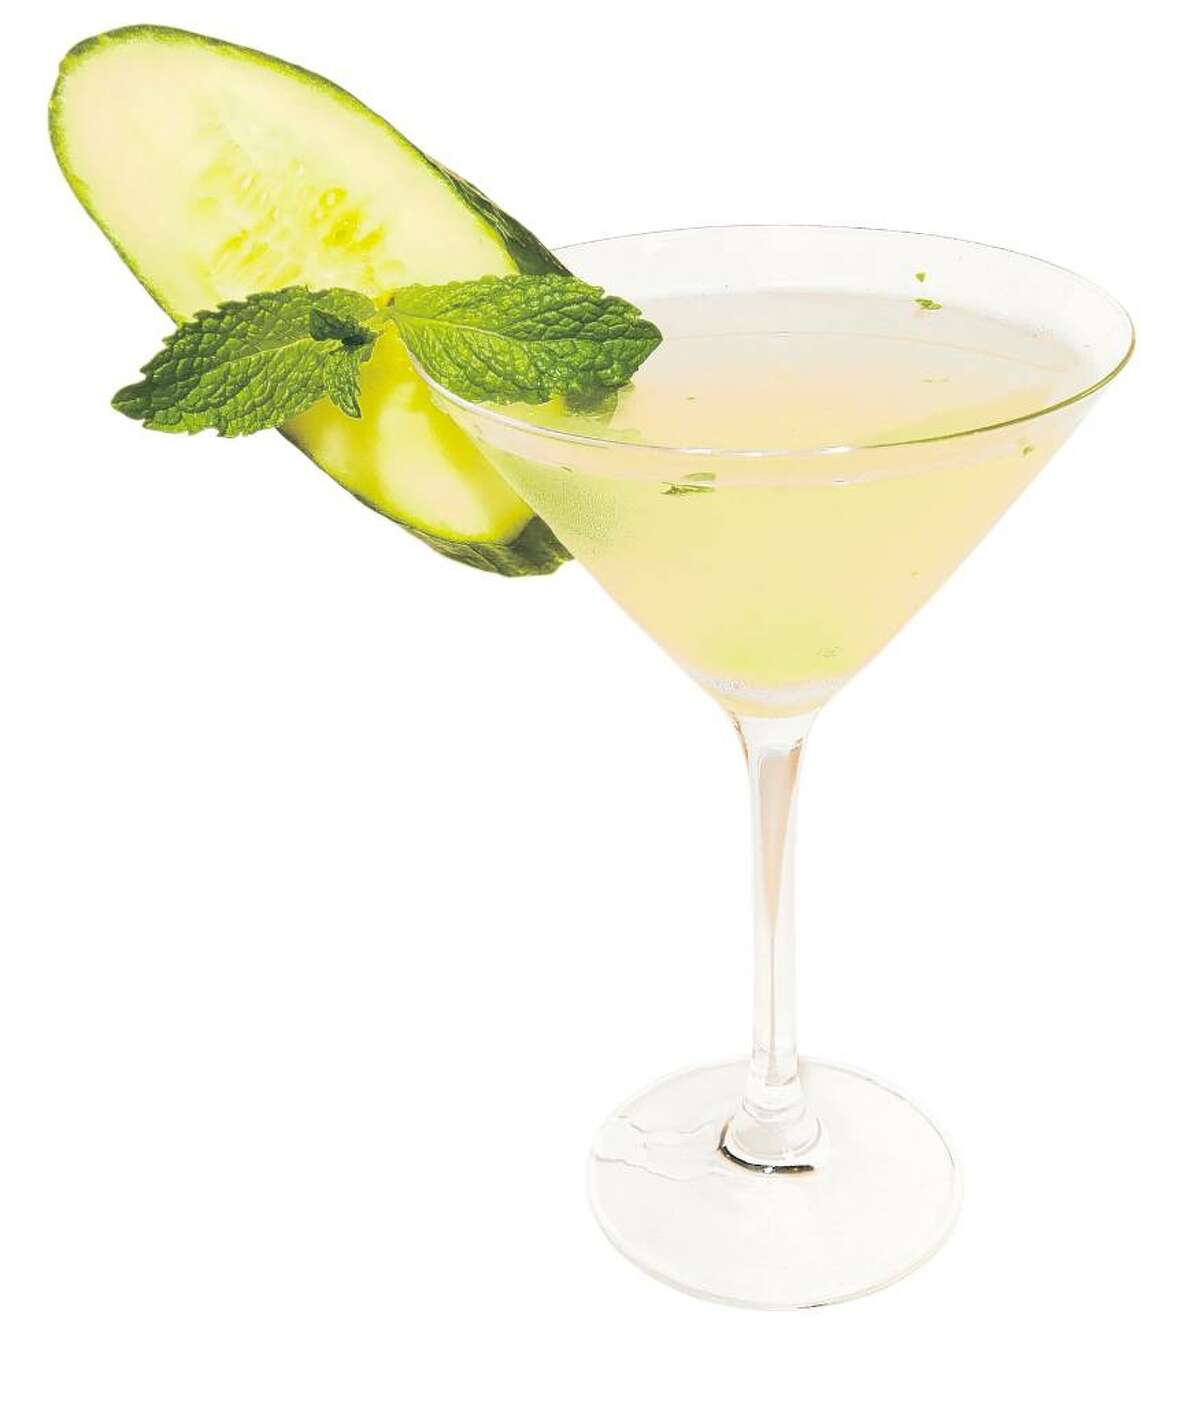 A cucumber martini made by Lara Davi at Dale Miller, The Art of Dining (Luanne M. Ferris / Times Union)